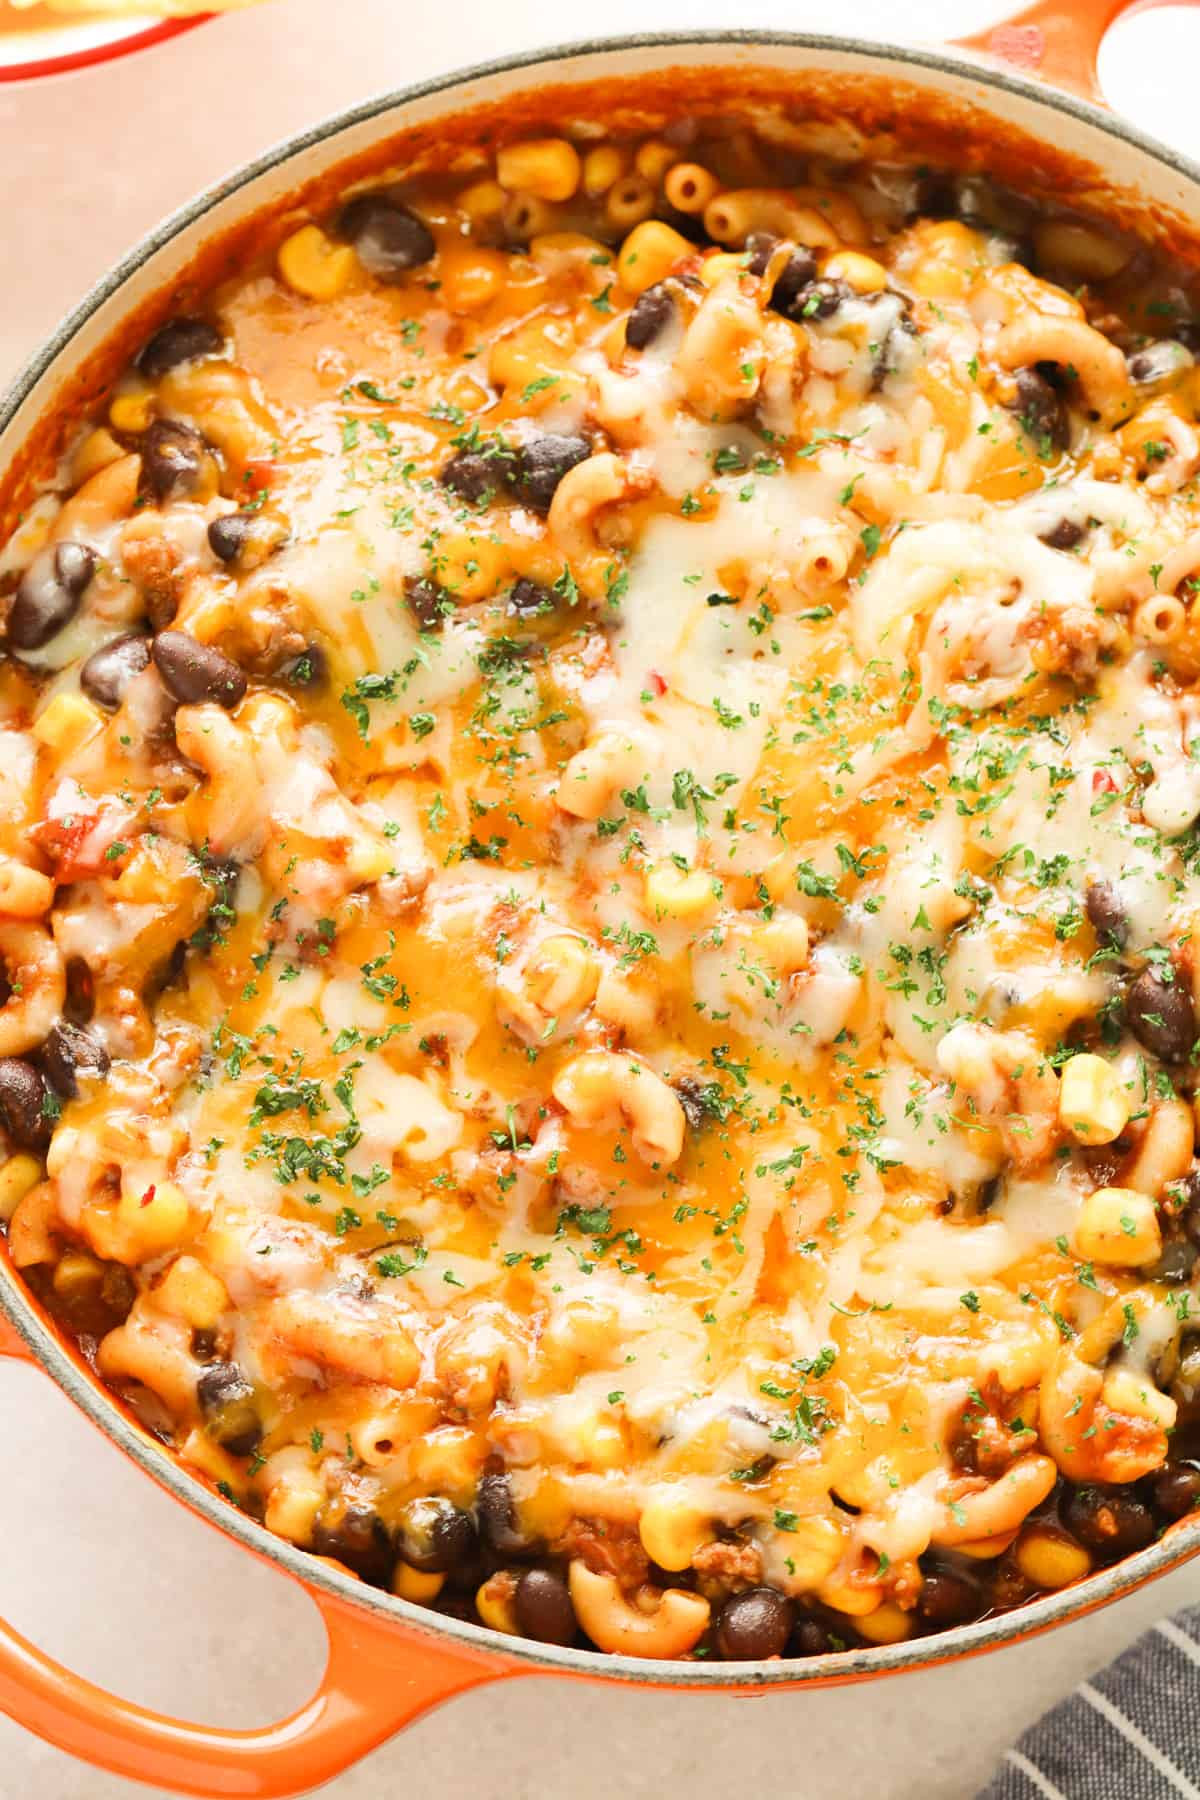 Macaroni pasta dish with black beans and melted cheese in a Dutch oven.